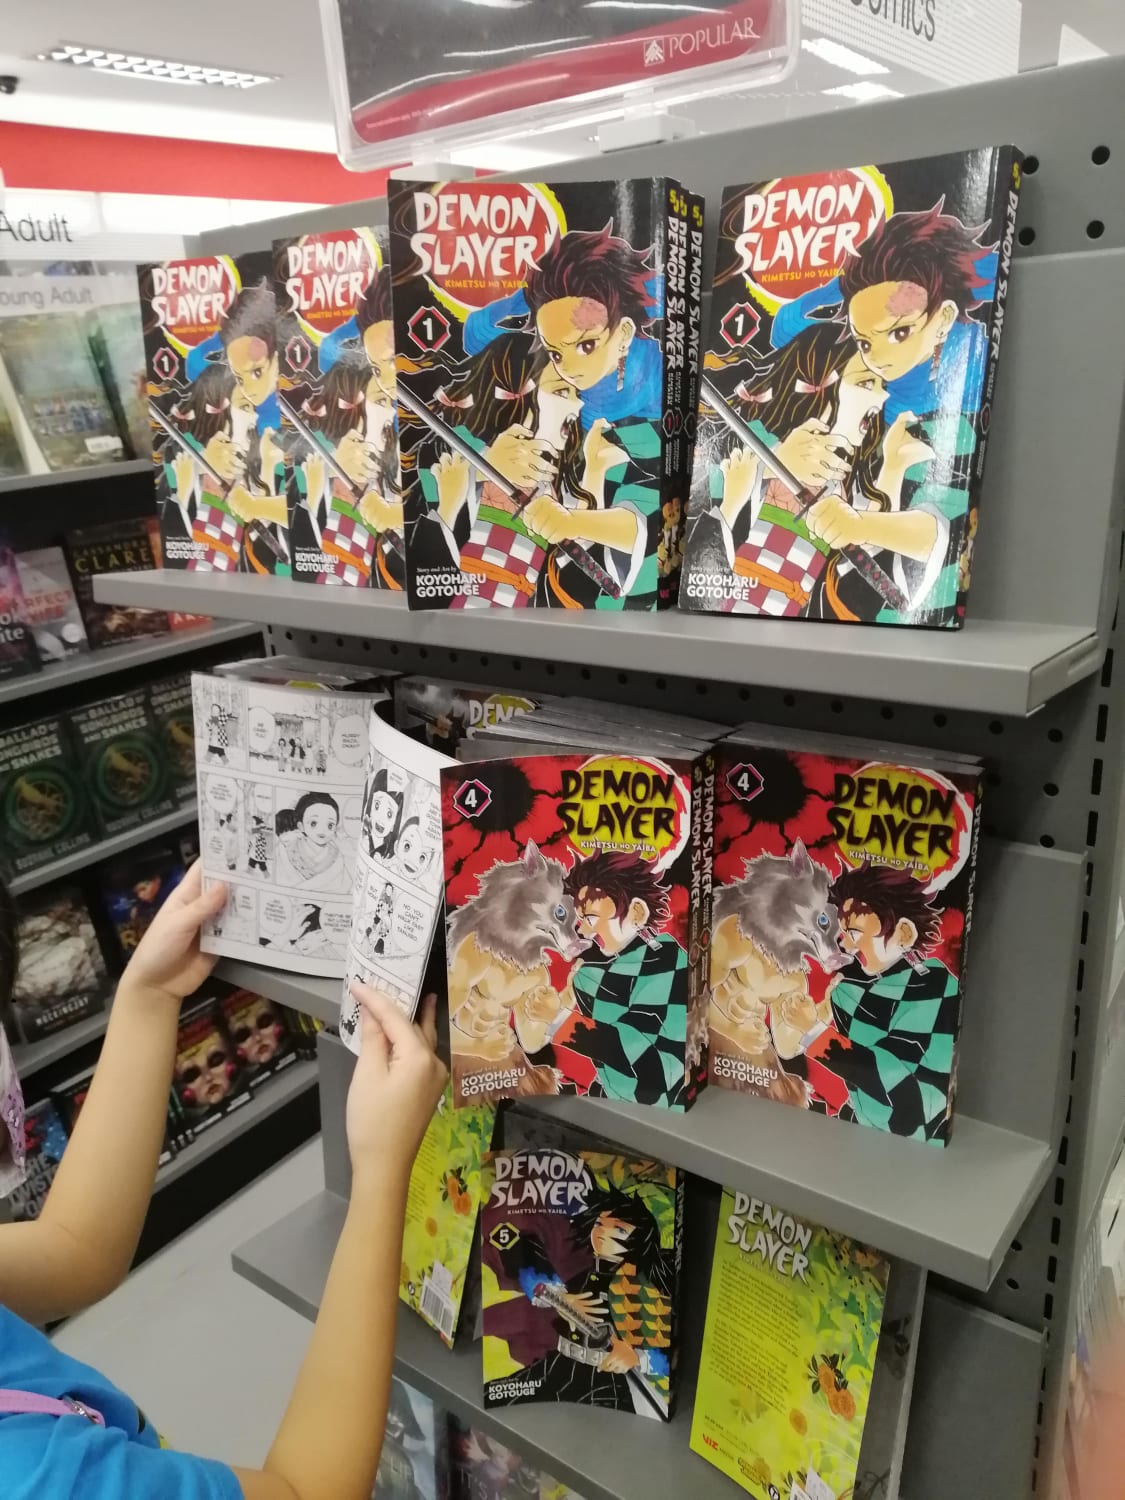 They've started selling Demon Slayer in my country's (Singapore) most widespread bookstore!